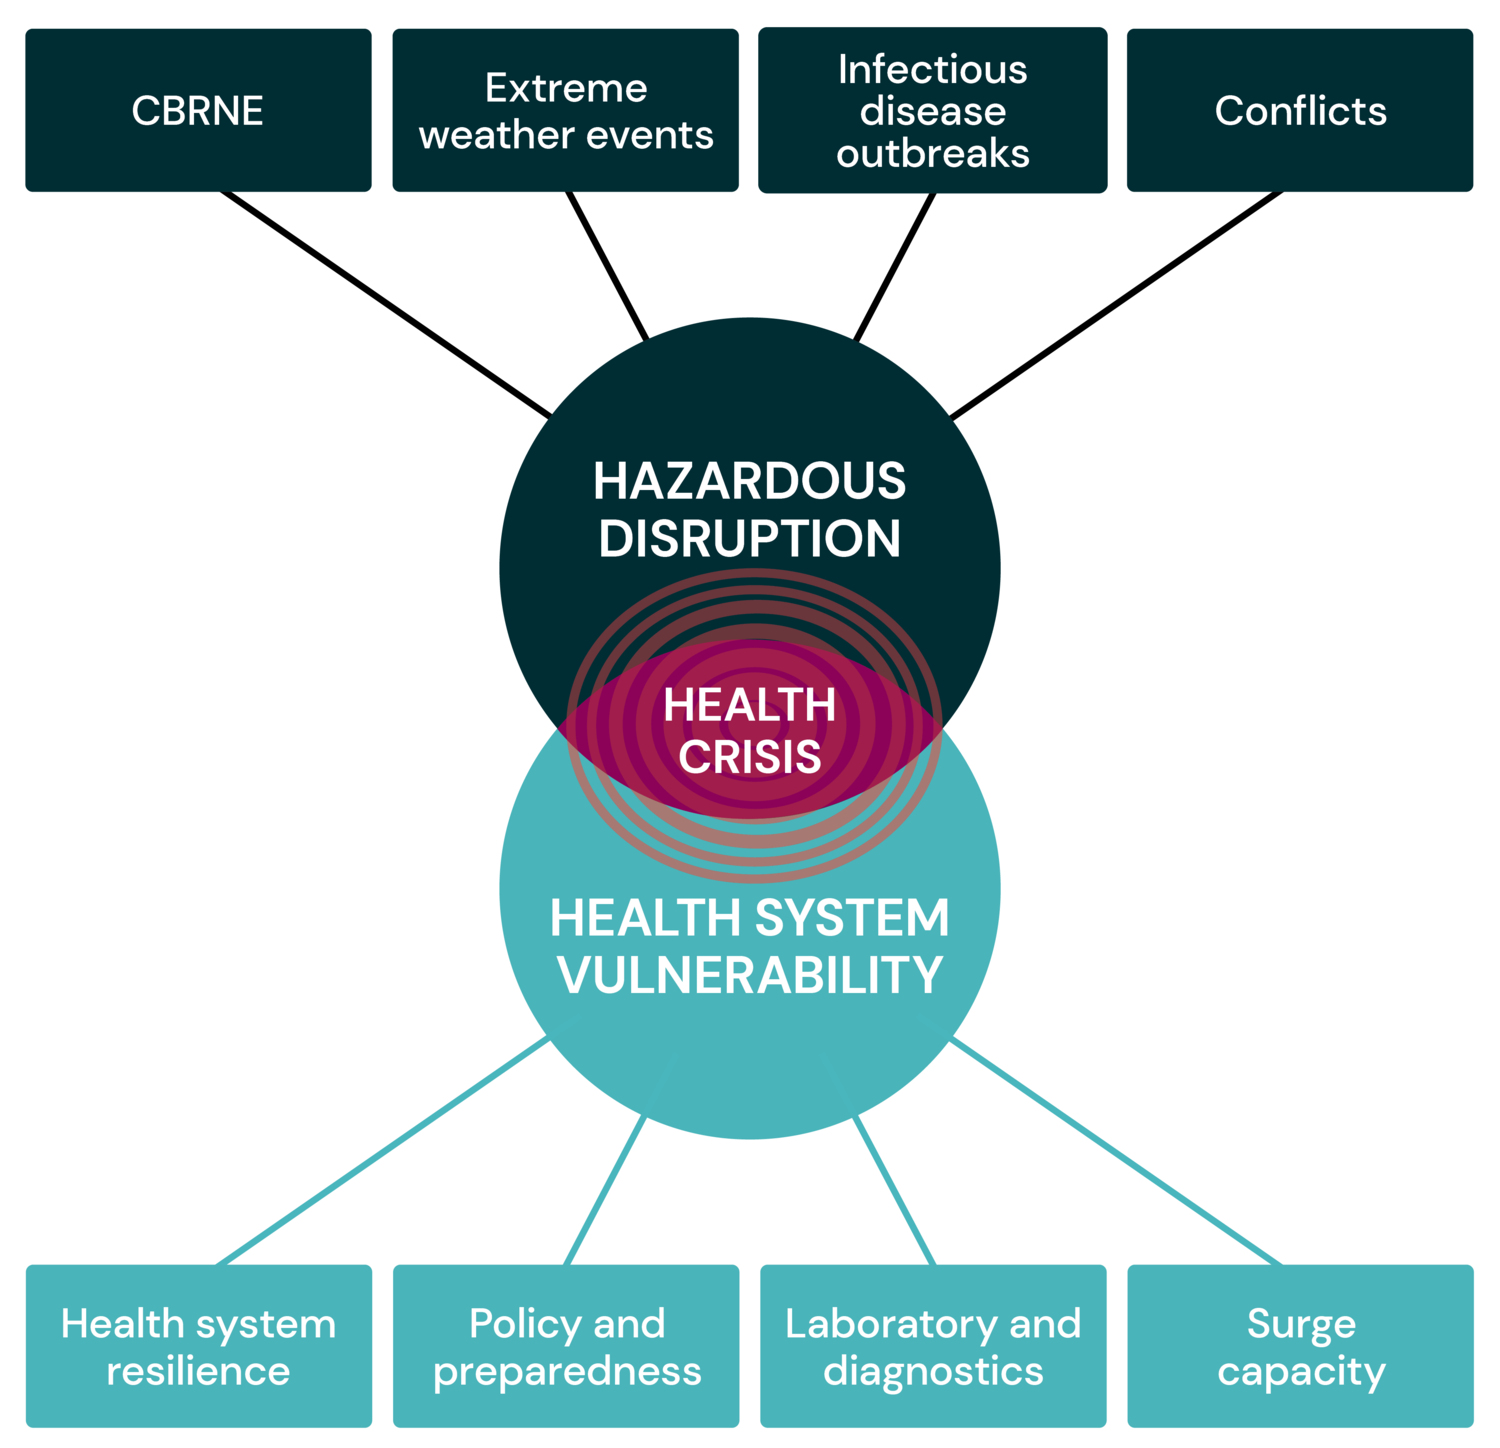 Illustration showing what a health crisis is. When a hazardous disruption meets a health system vulnerability, a health crisis occur. Connected to hazardous disruptions and vulnerabilities there are several types of health crises